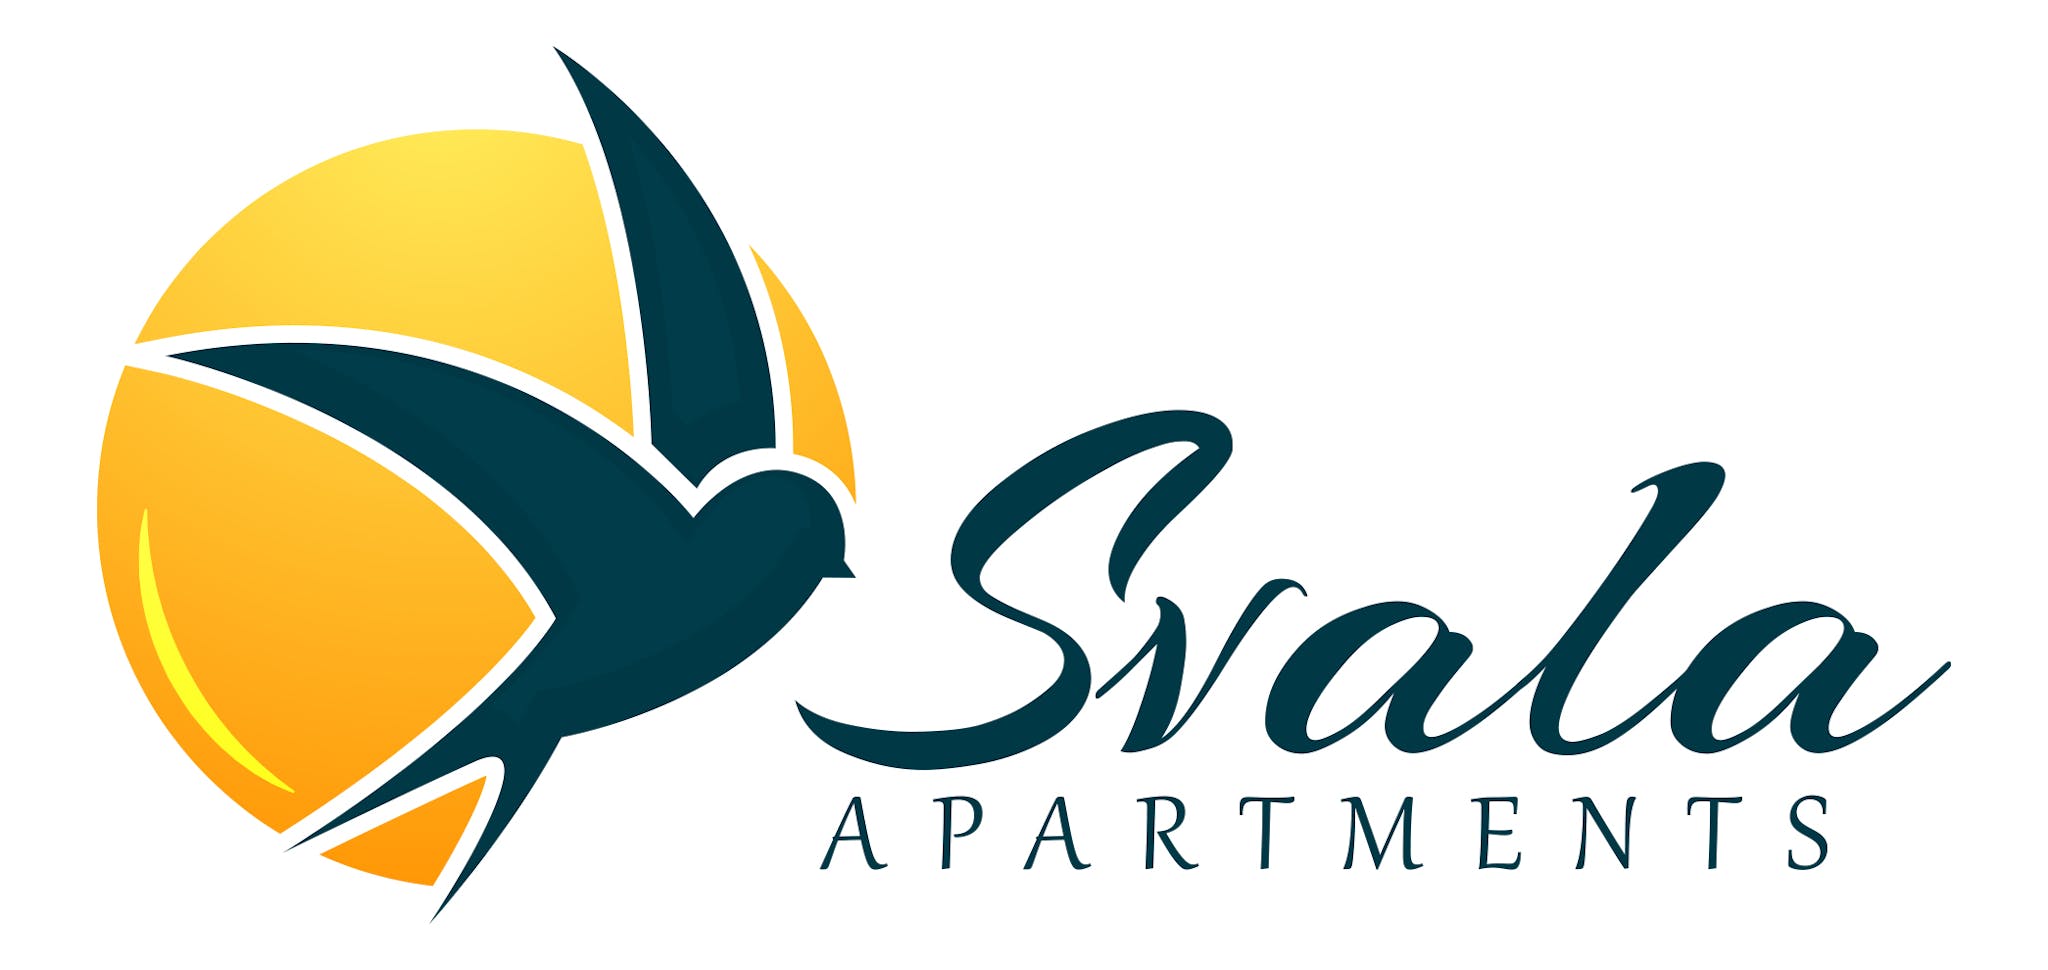 Svala Apartments Guide